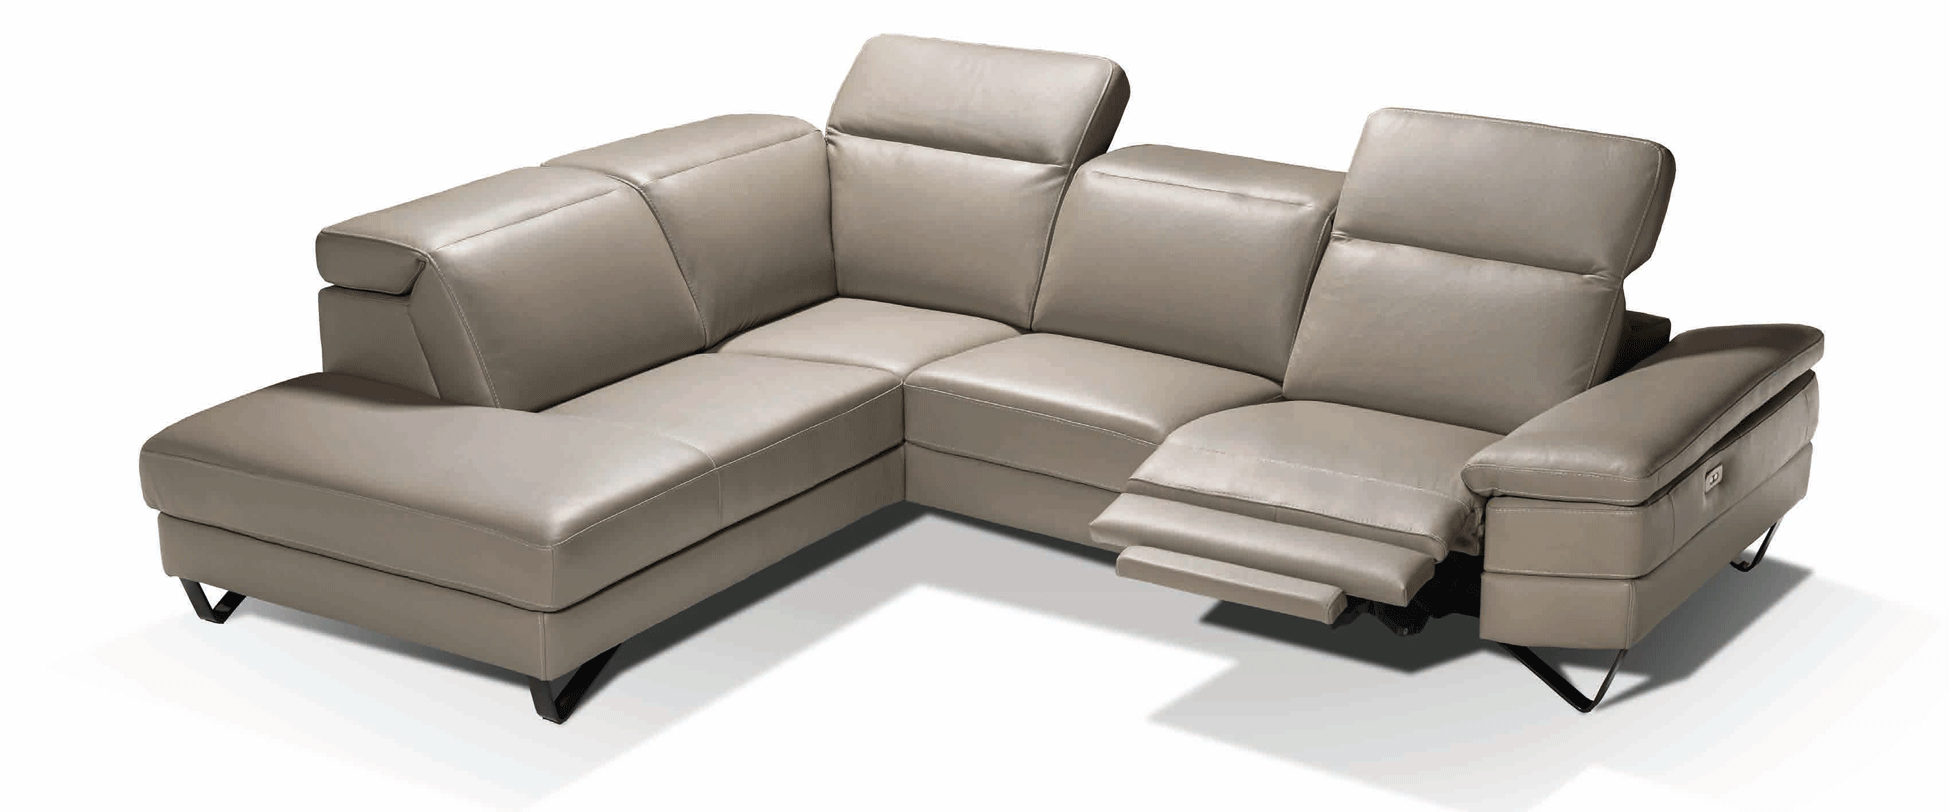 Living Room Furniture Reclining and Sliding Seats Sets Marconi Living room